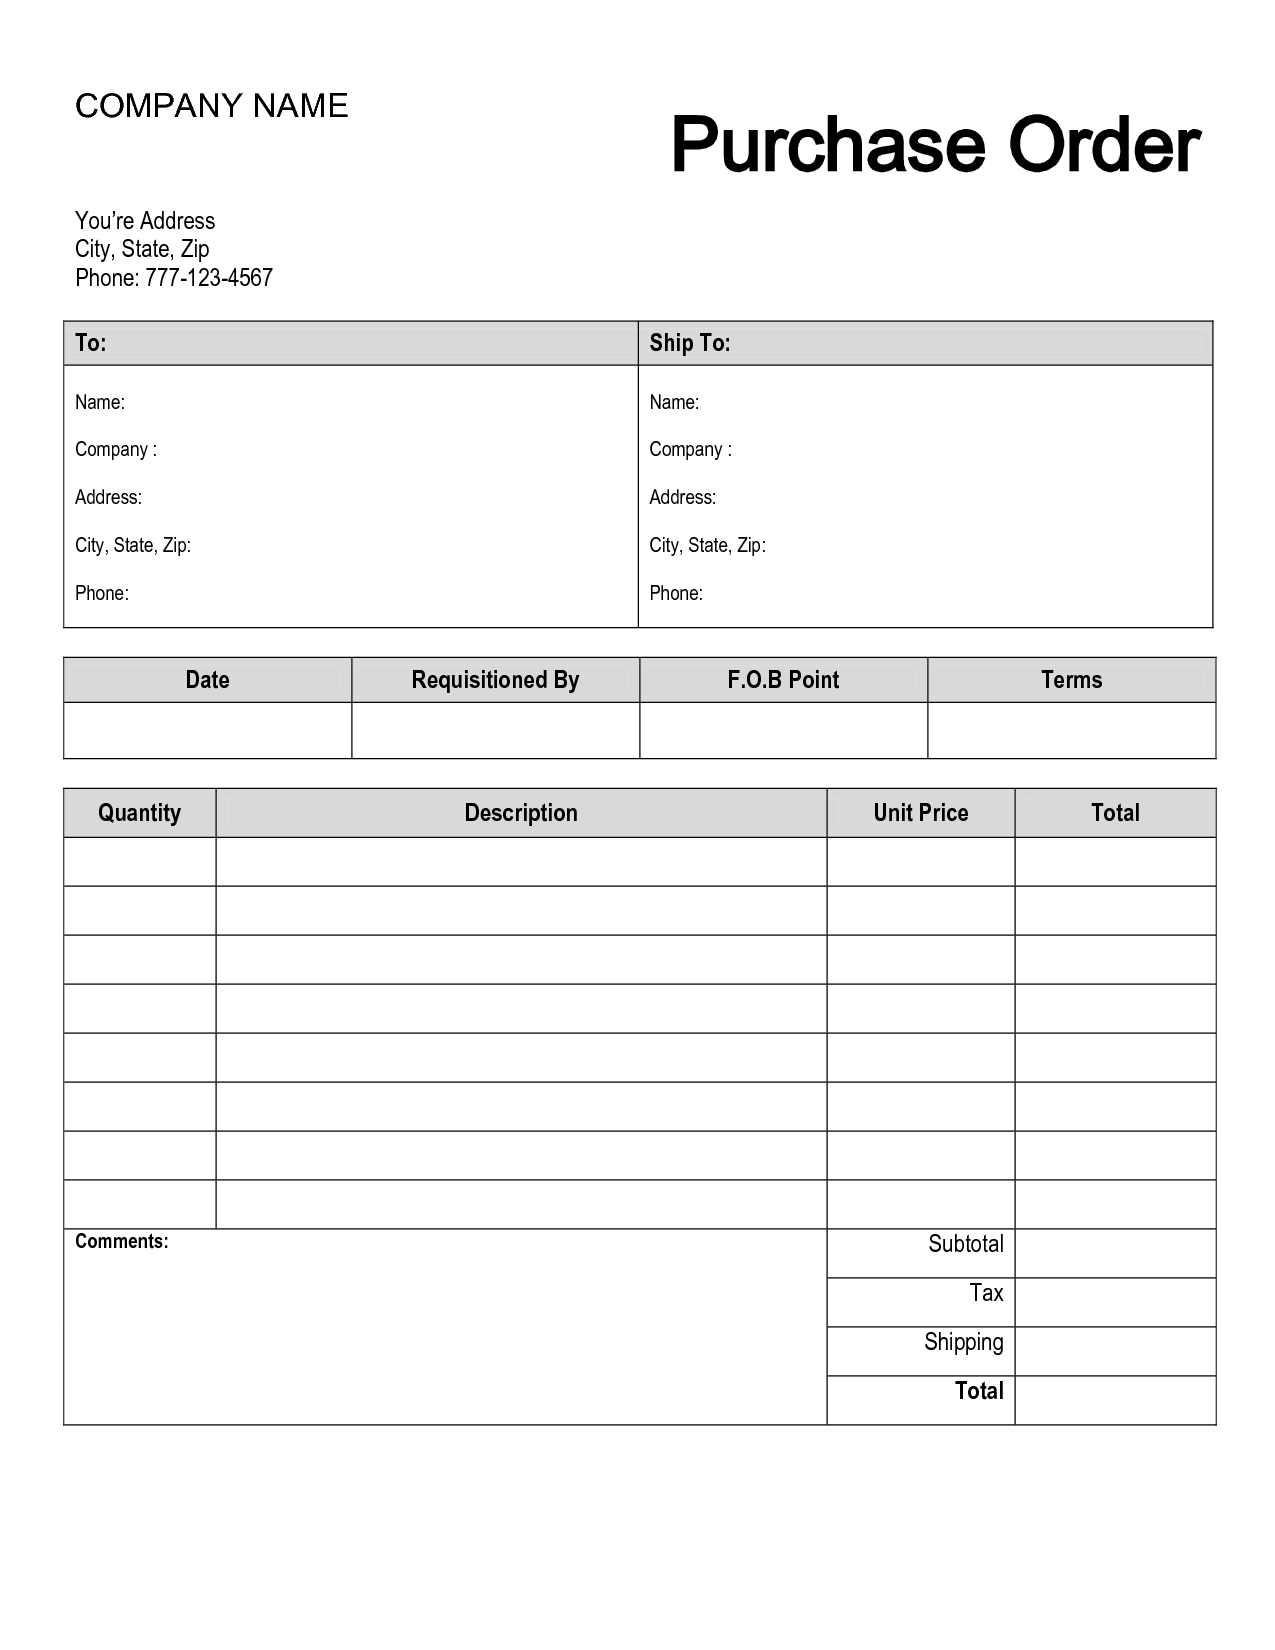 Free Printable Purchase Order Form | Purchase Order | Shop | Order - Free Printable Business Forms